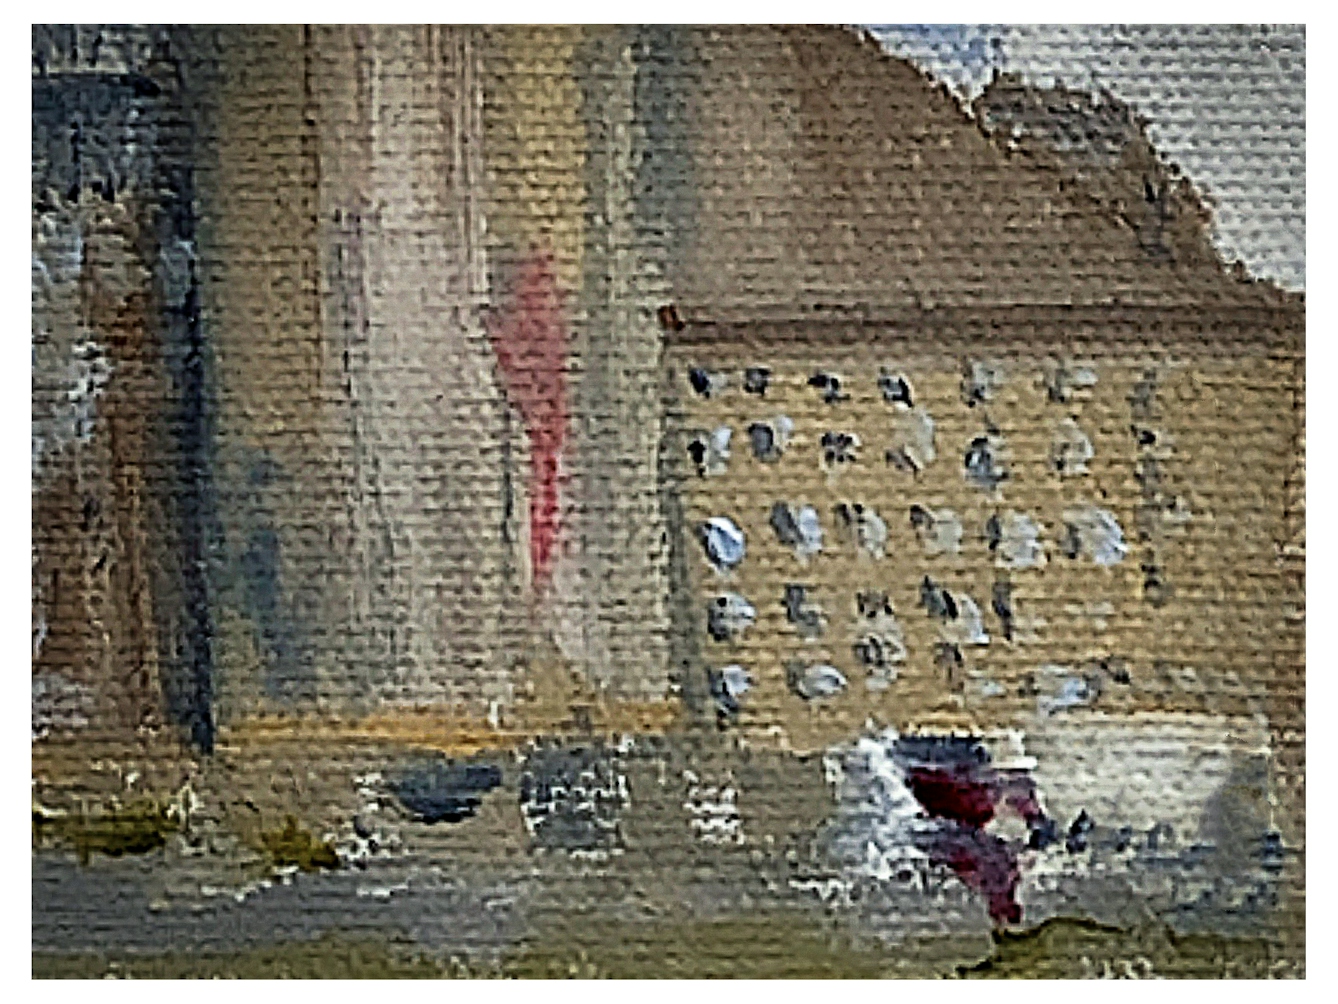 Photograph of a detail of a larger oil on canvas painting. The painting has been created with bold, think, textured brush strokes in a semi-abstract manner. The scene depicted is of Battersea Power Station in London. The scene shows the power station after having been decommissioned and shows signs of dilapidation.